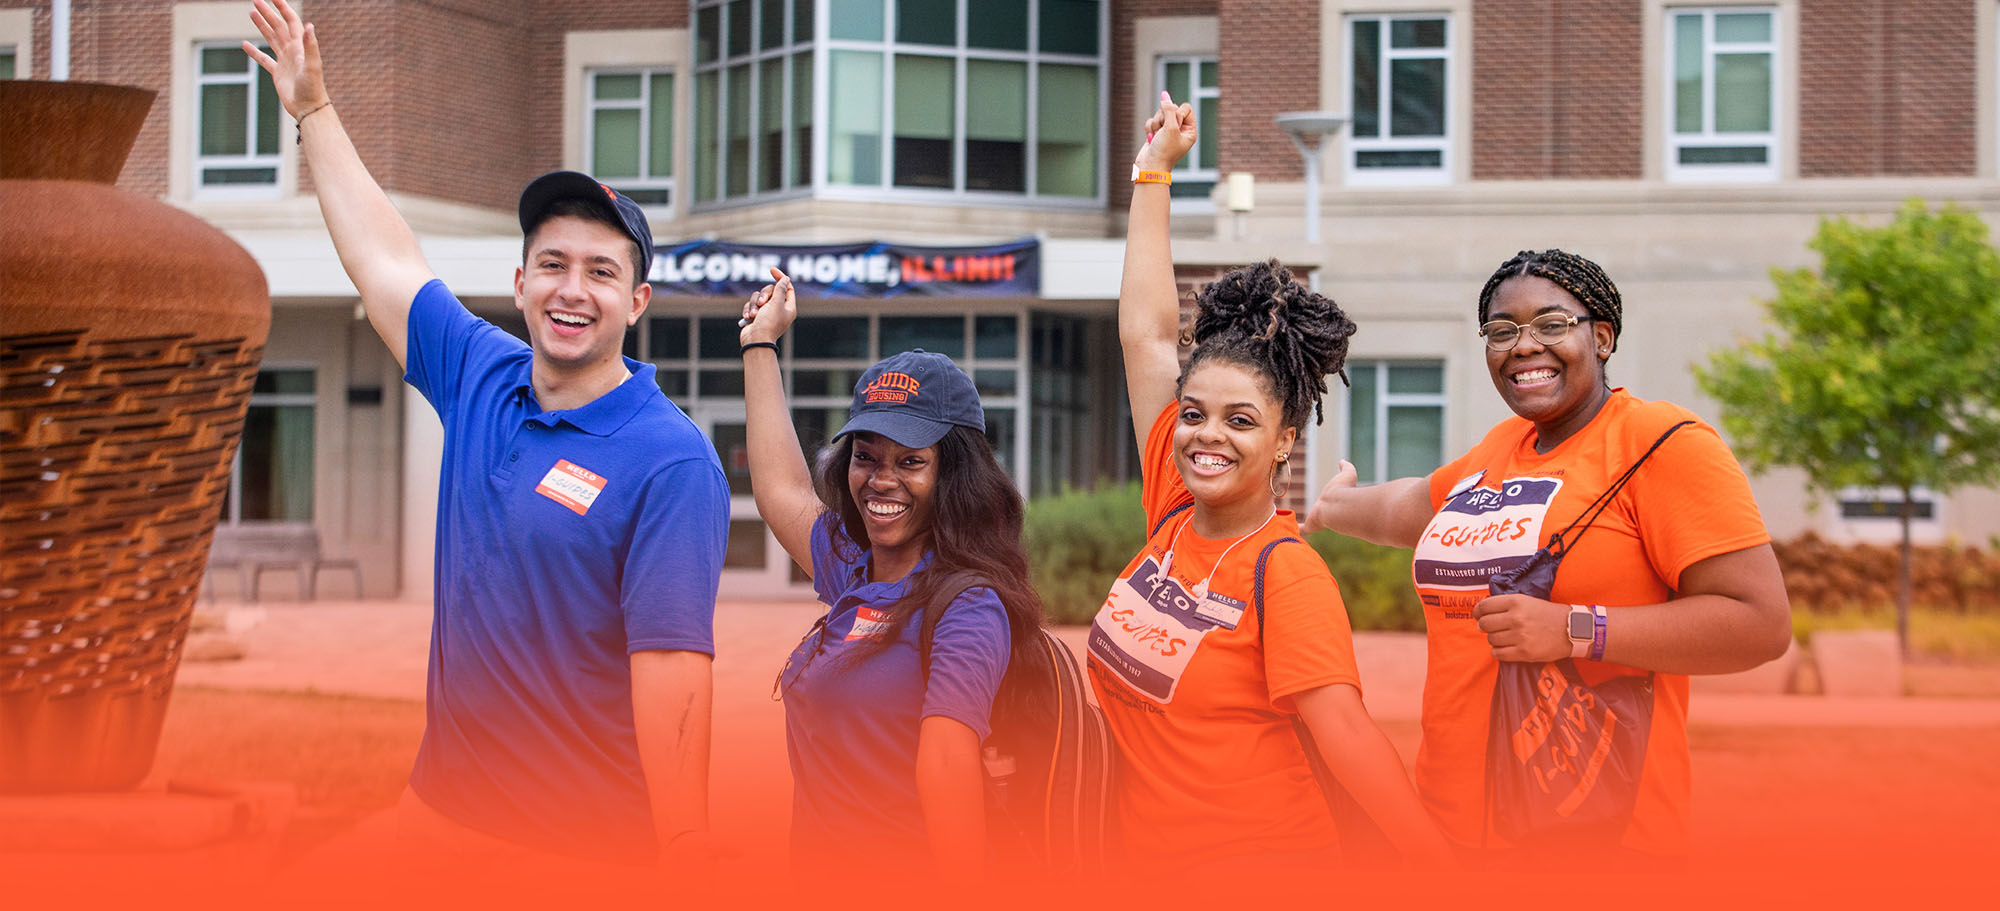 I-Guides help new students move their belongings into their rooms as students move into University of Illinois undergraduate residence halls